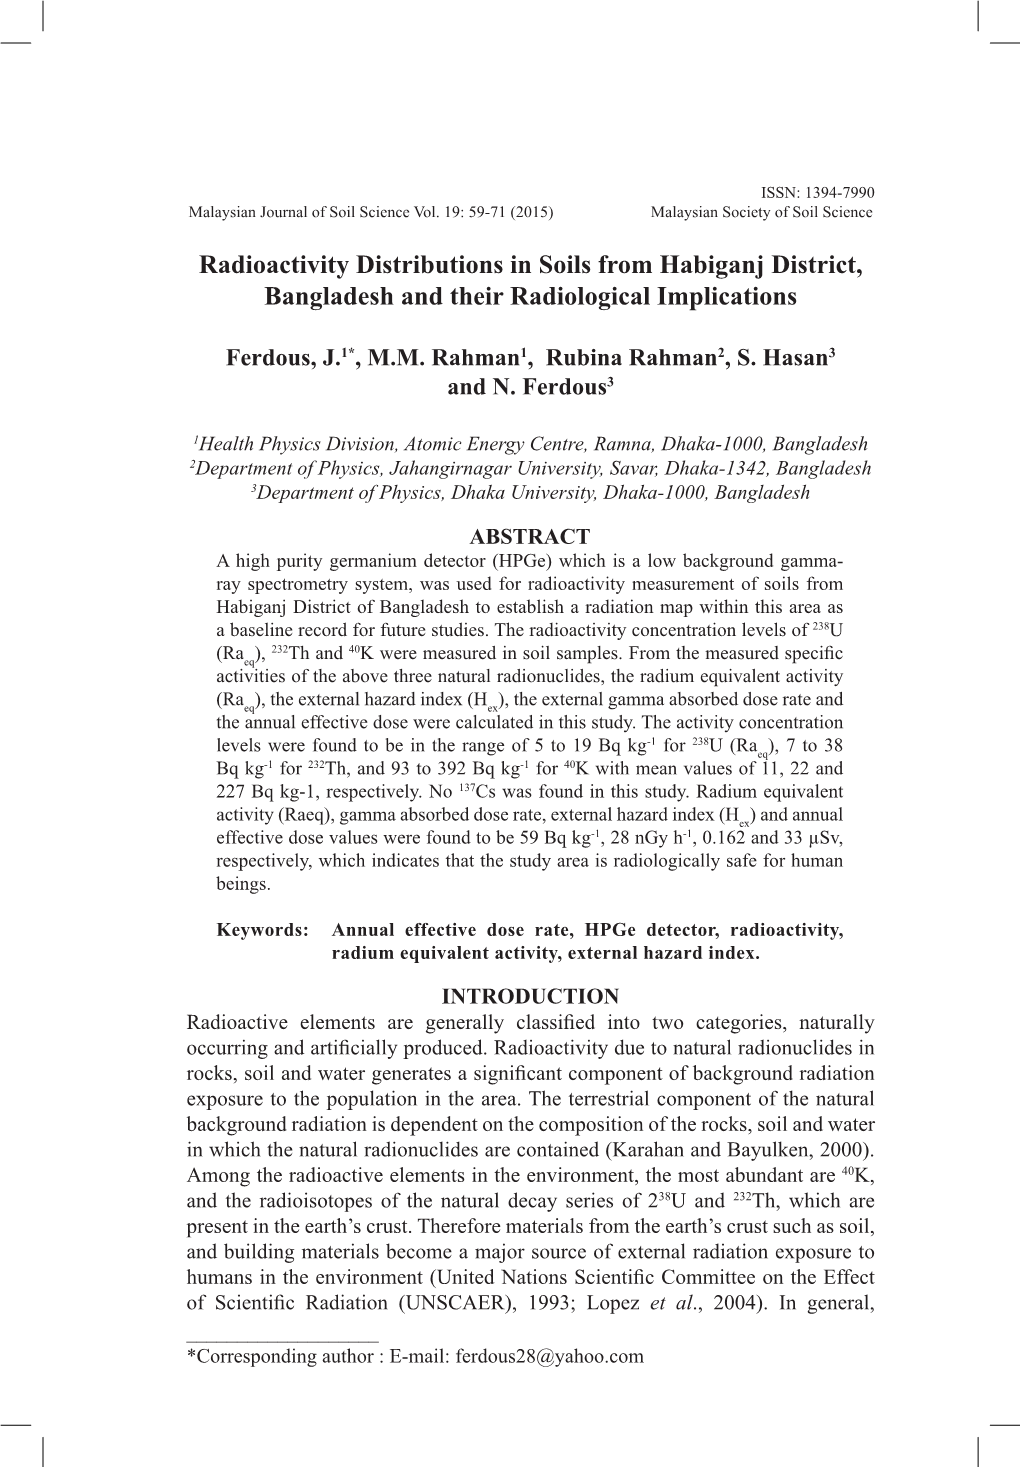 Radioactivity Distributions in Soils from Habiganj District, Bangladesh and Their Radiological Implications